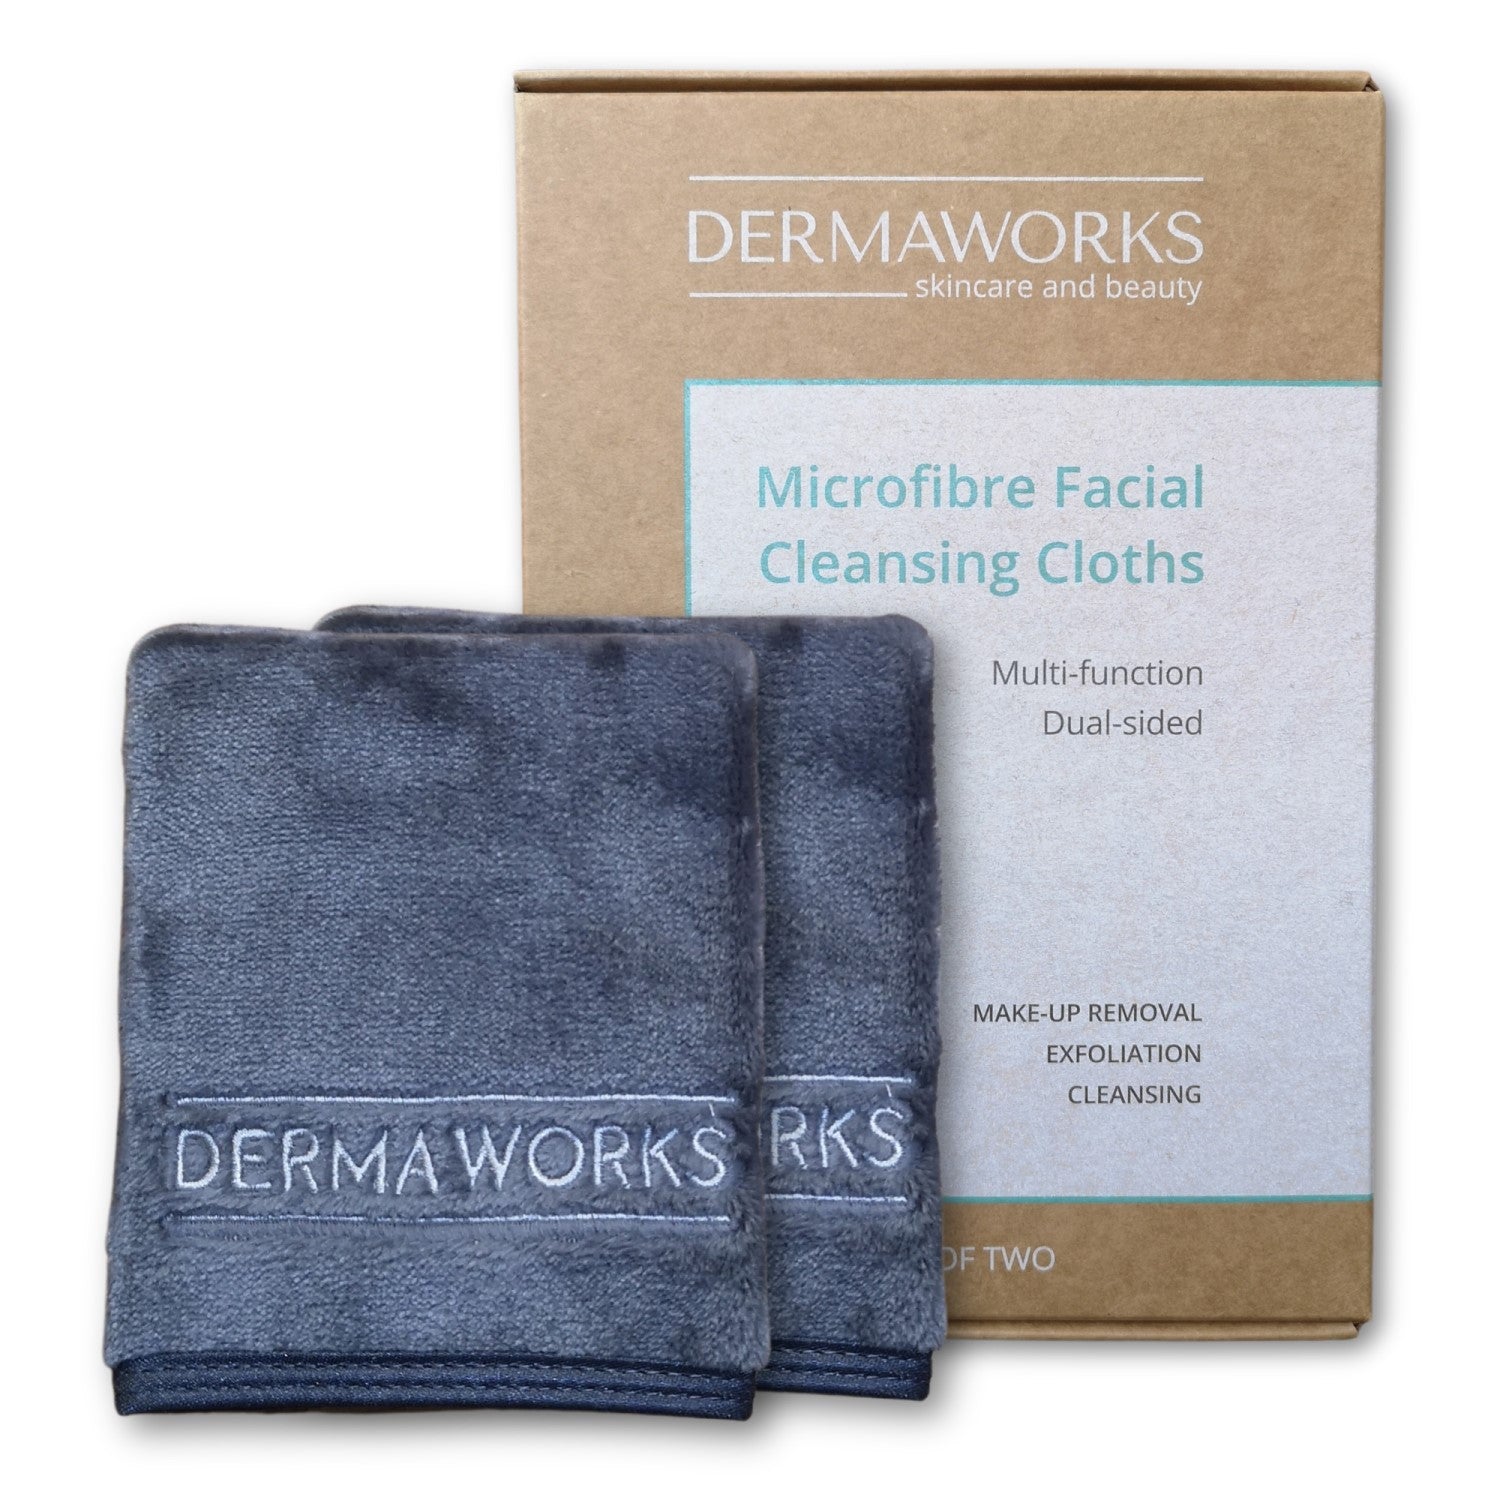 Dermaworks reusable microfibre flannel face cloth and make up remover. Deep cleansing and exfoliating.